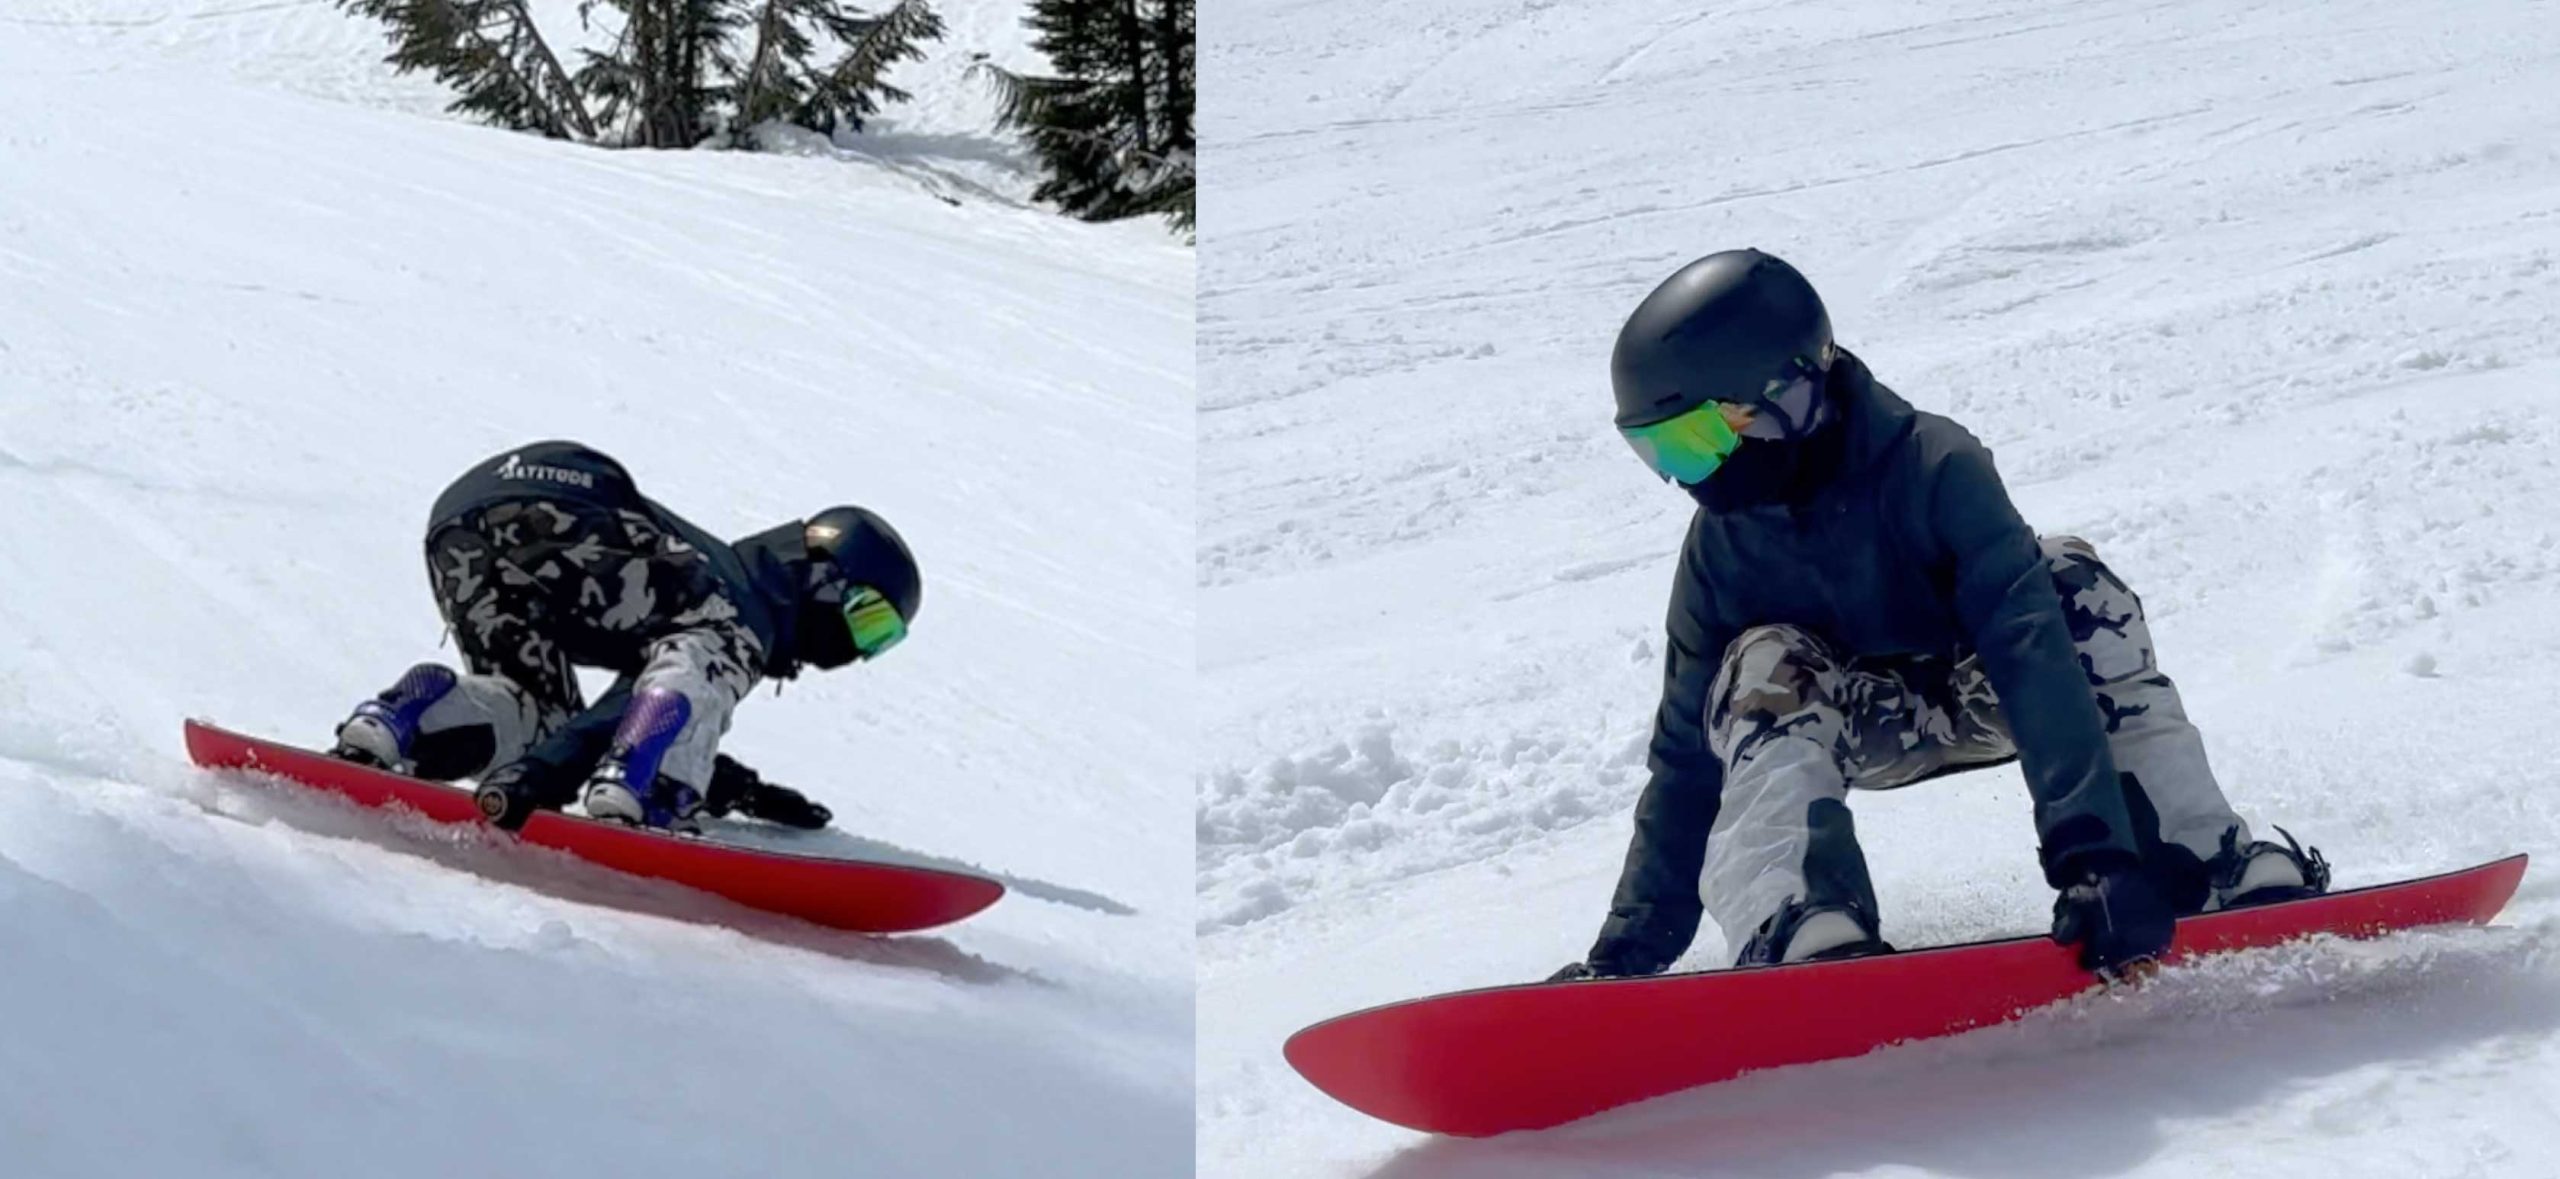 Korua Cafe' Racer Plus Snowboard Review (with video)